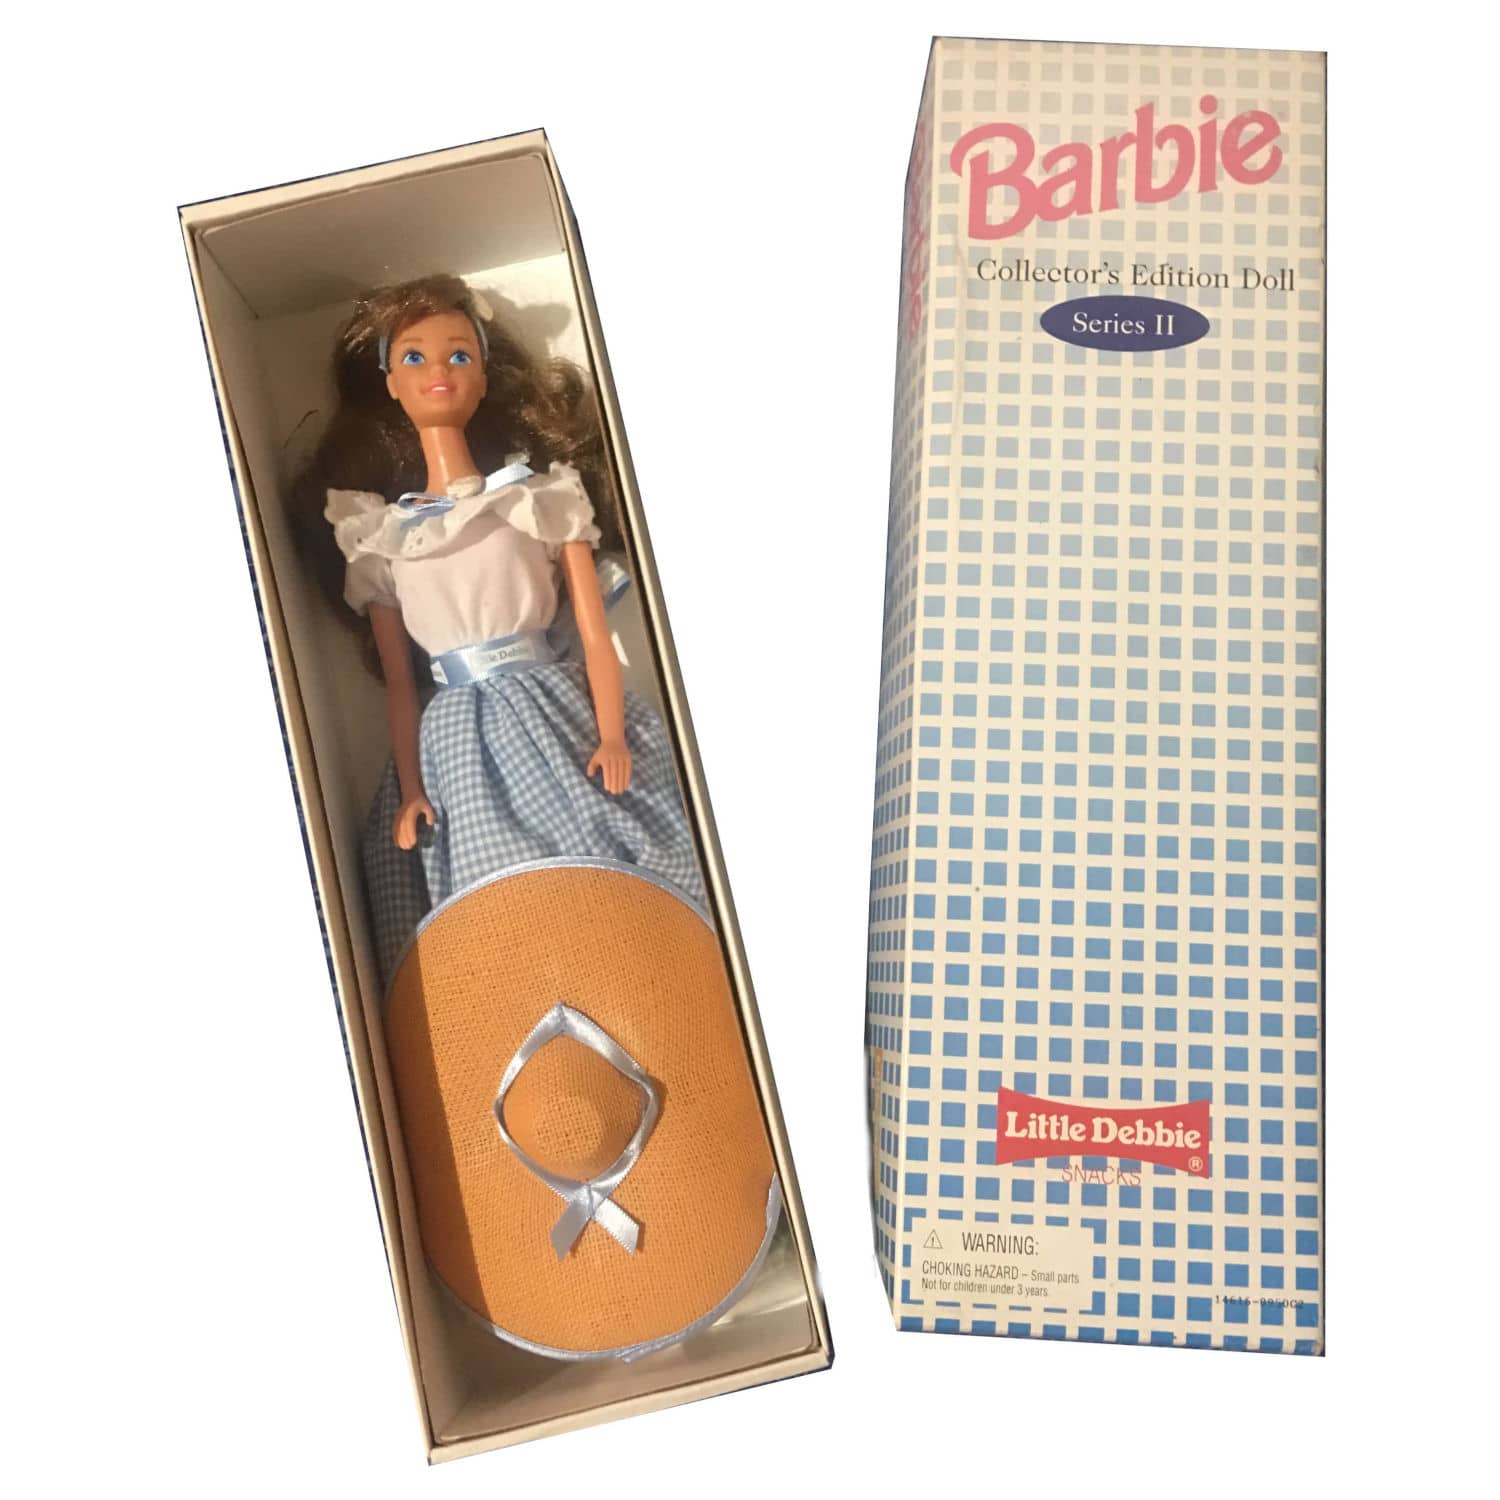 Barbie Collector’s Edition Doll Series II